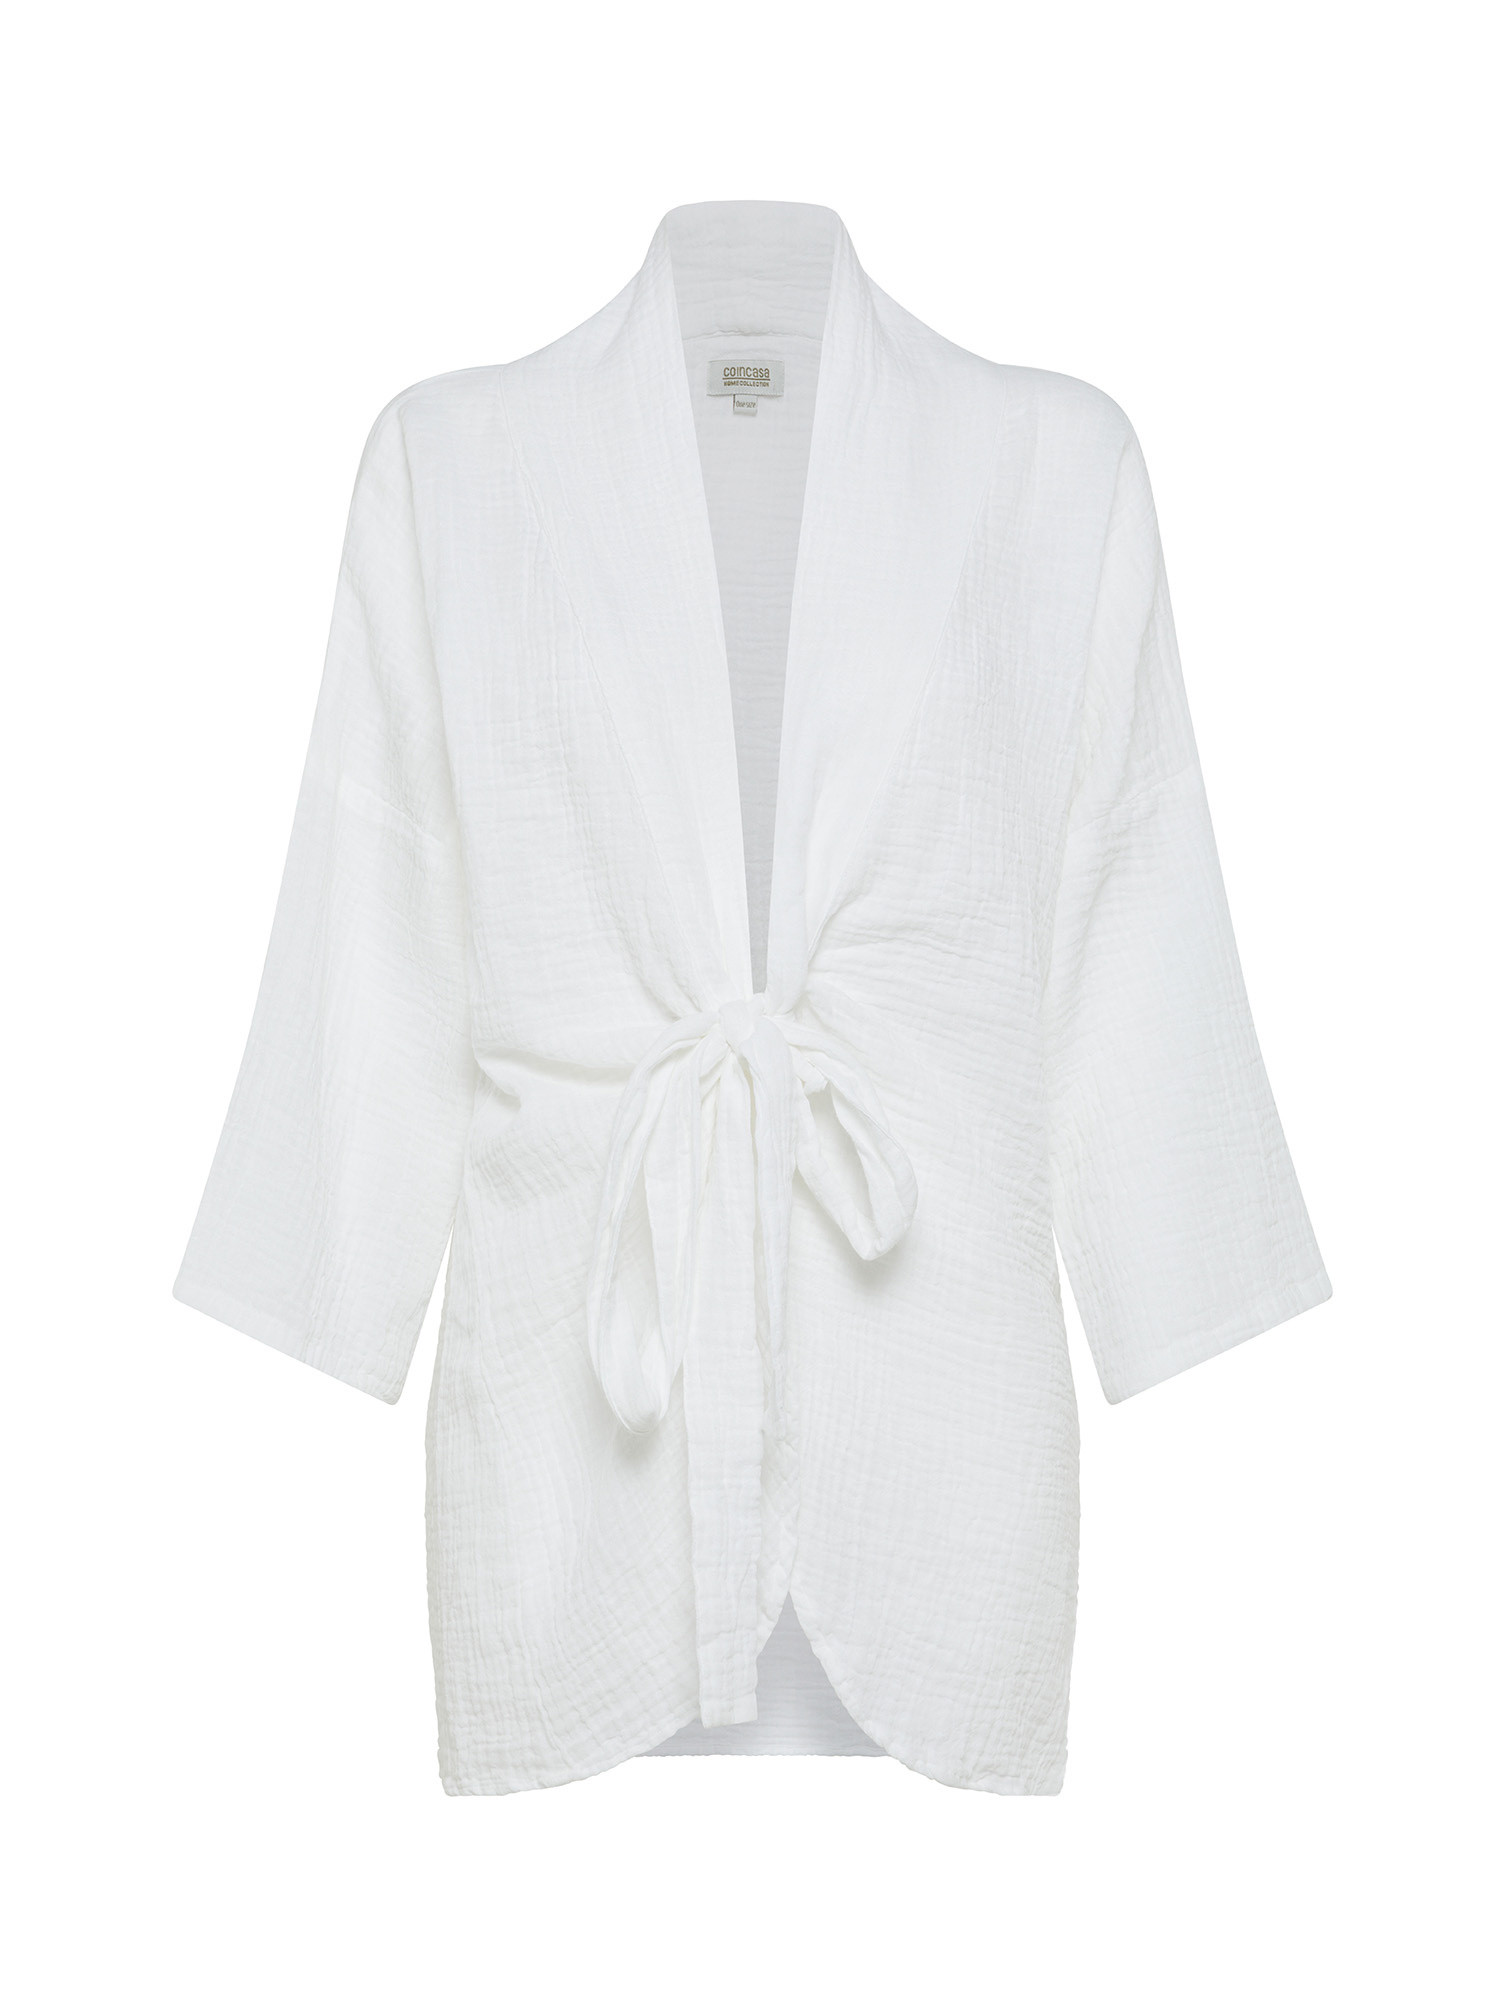 Muslin cover-up with belt and shawl collar, White, large image number 0